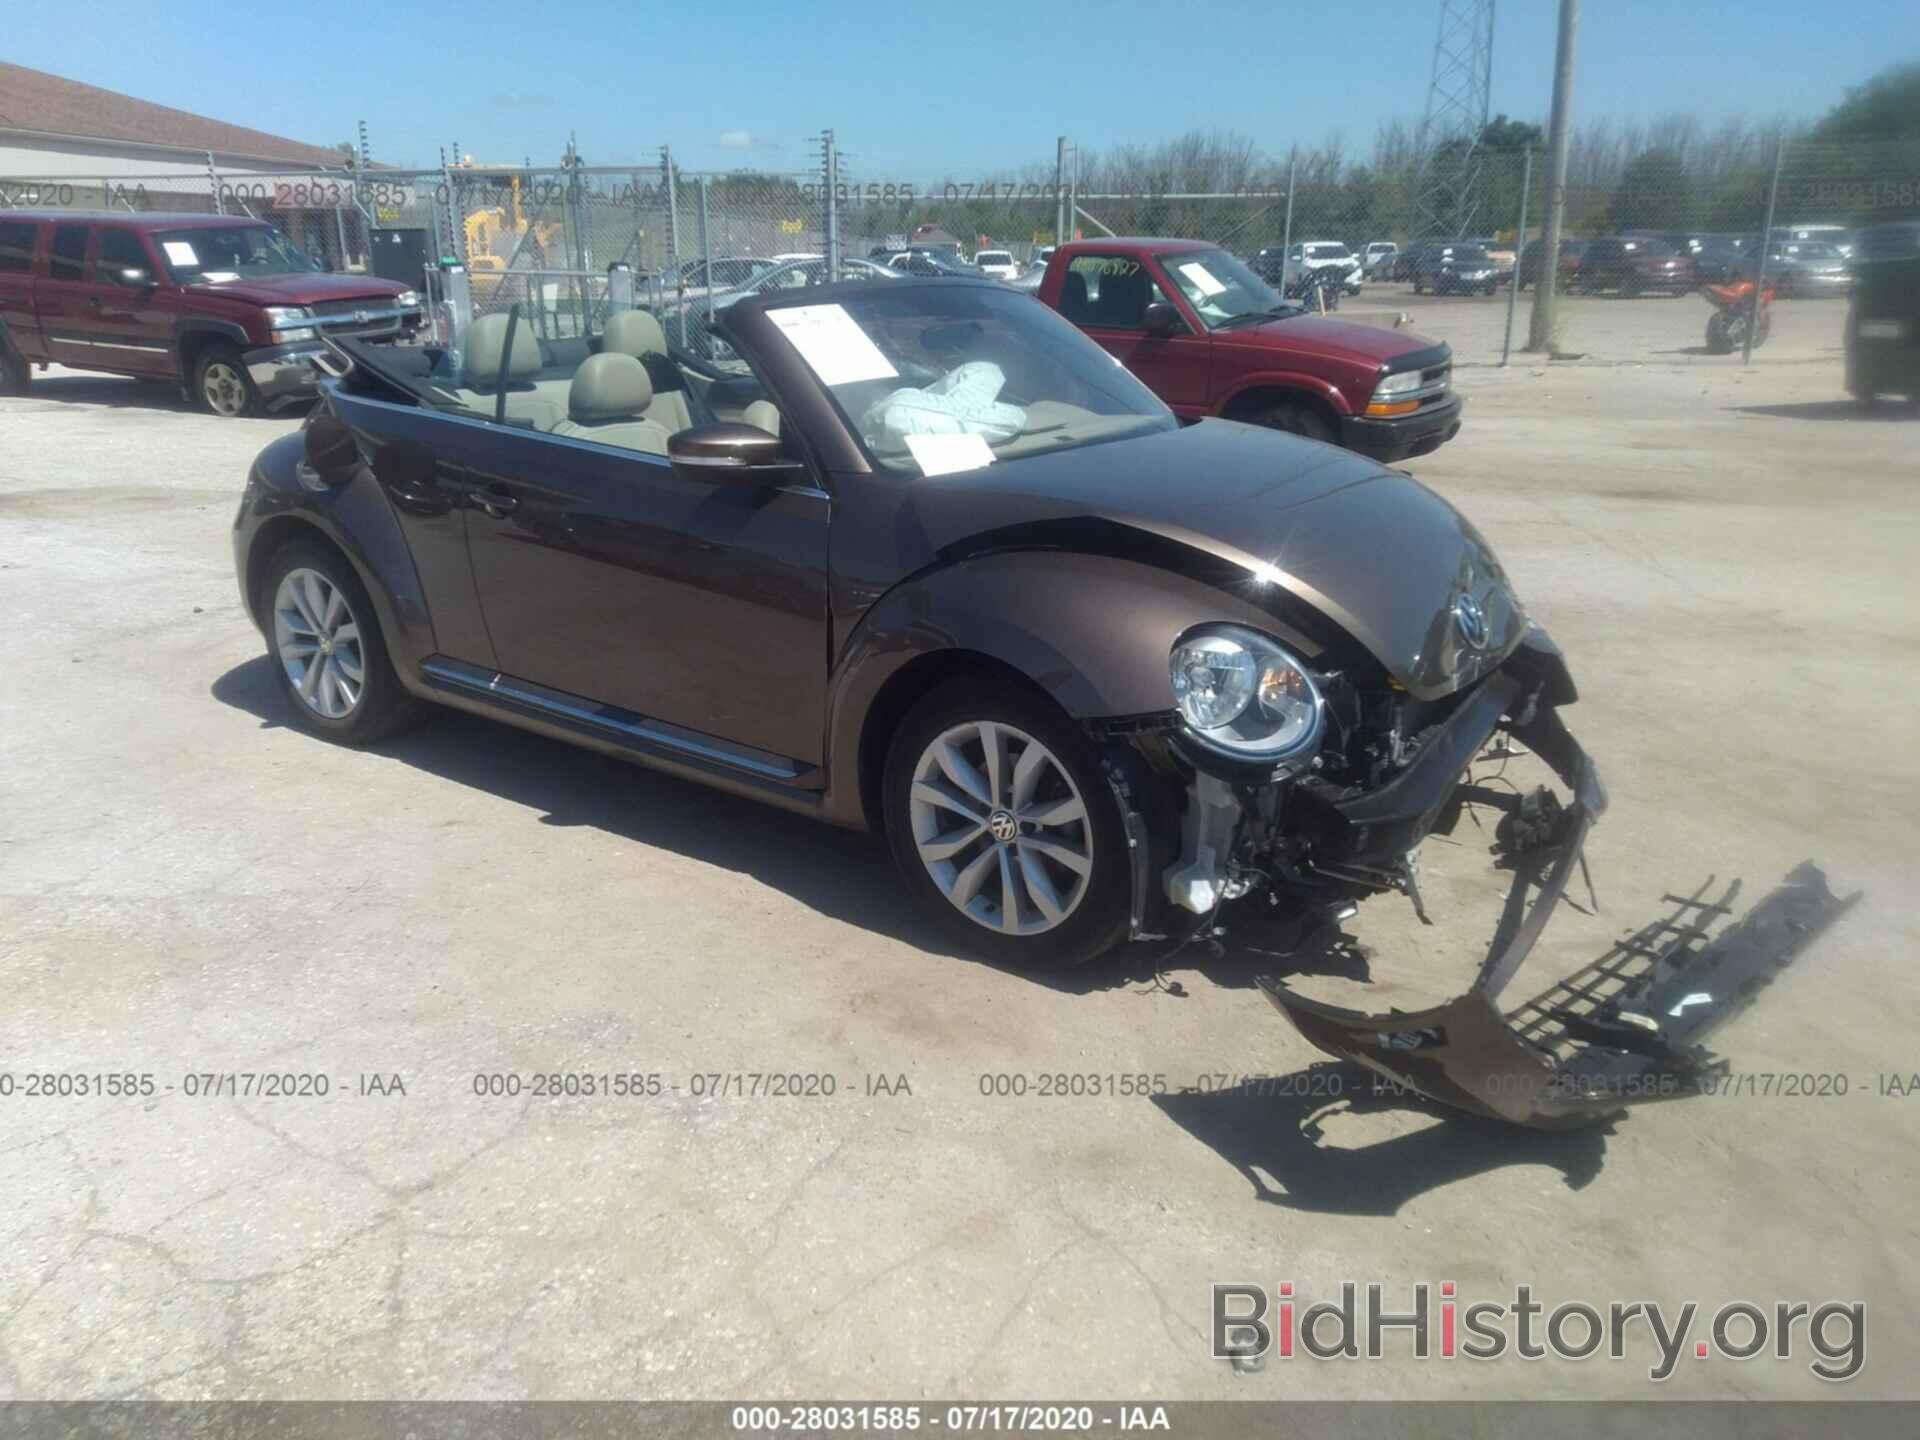 Photo 3VW5A7AT4FM817107 - VOLKSWAGEN BEETLE CONVERTIBLE 2015